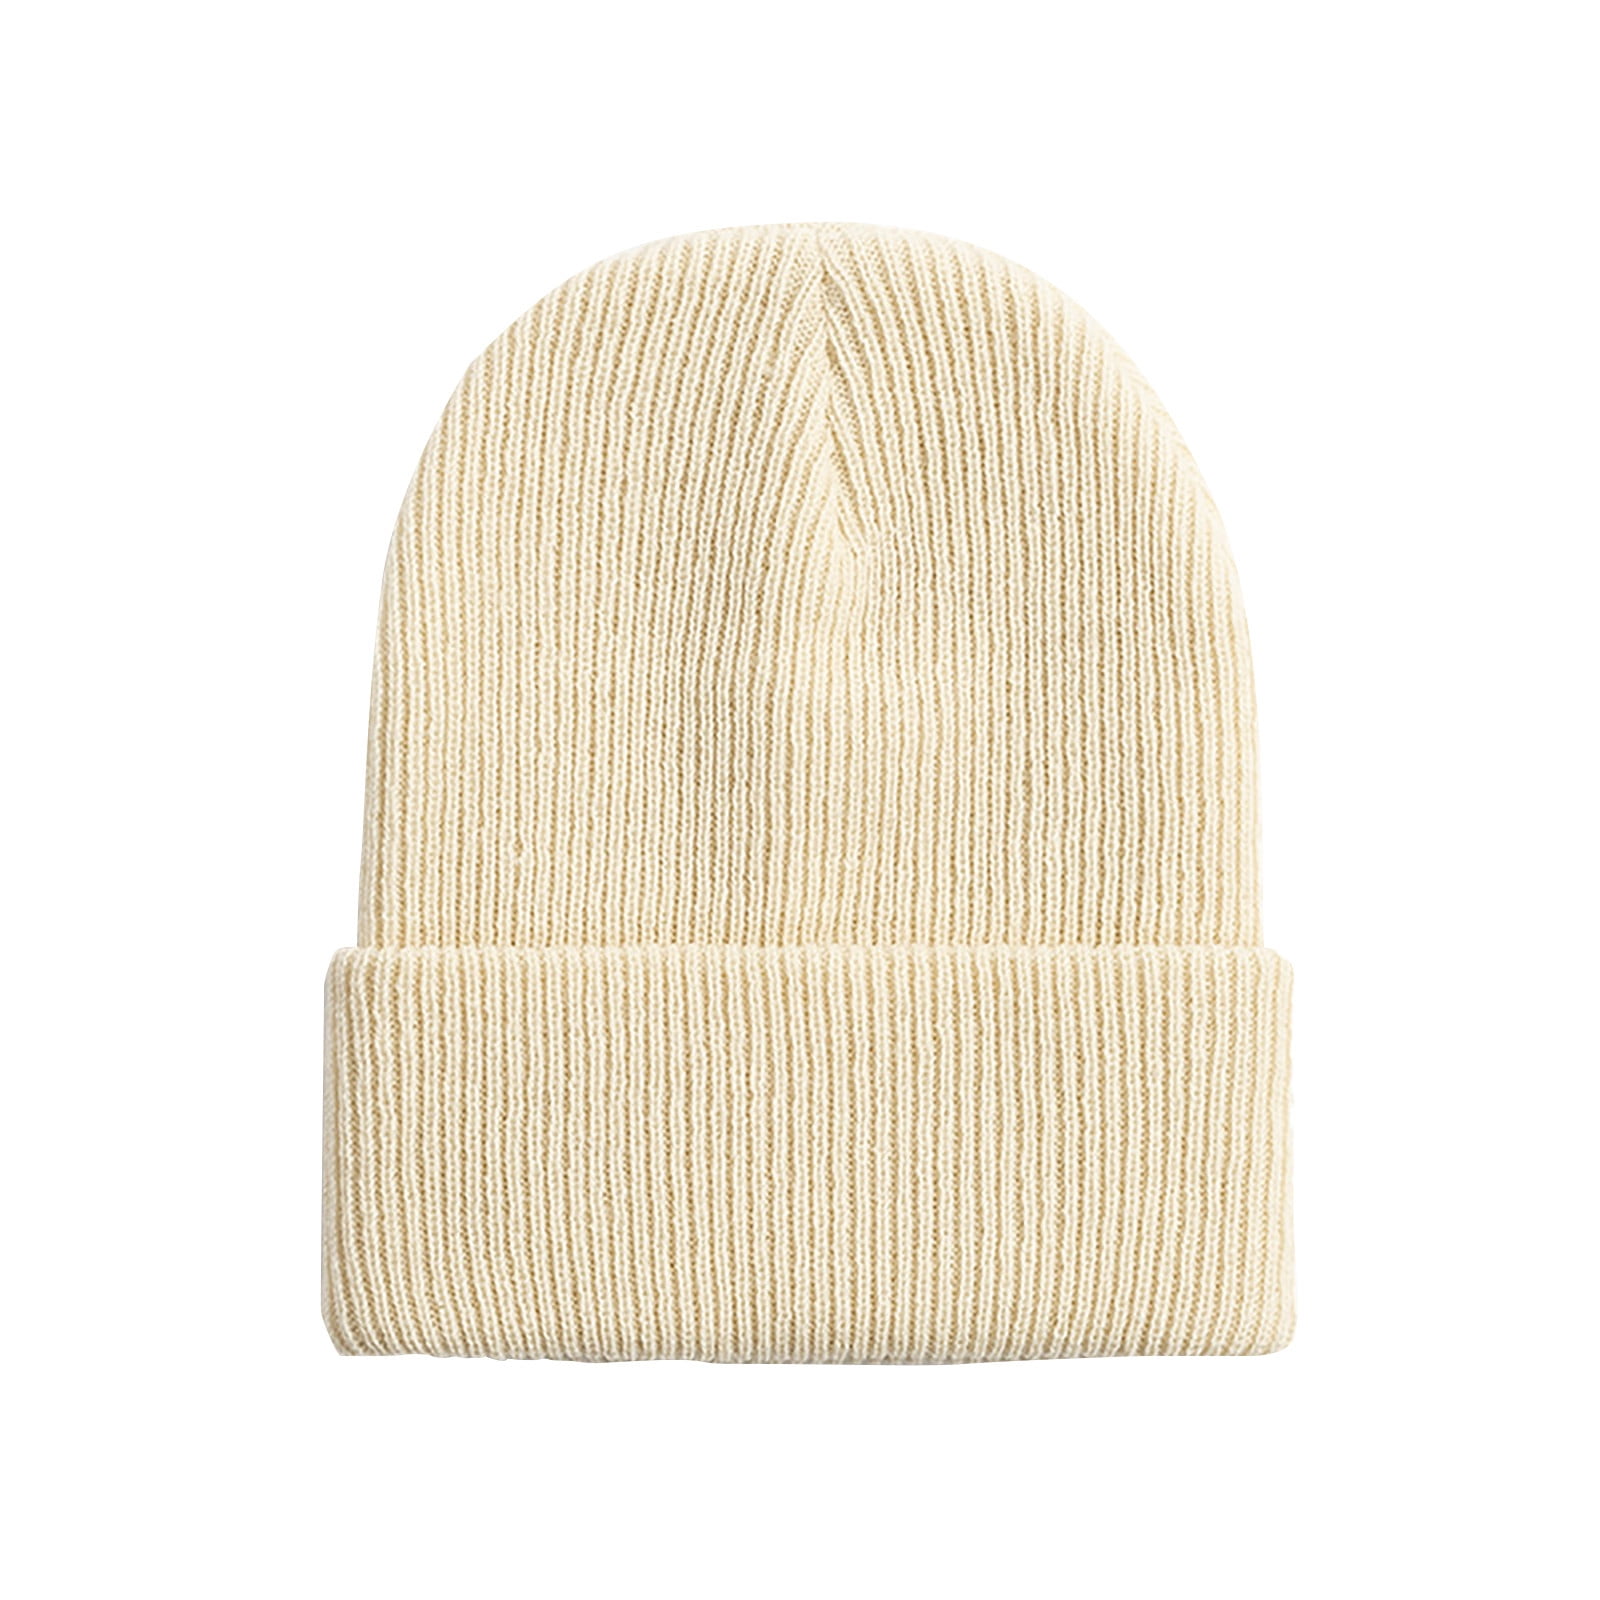 Beige Soft Ribbed Knit Beanie, Accessories